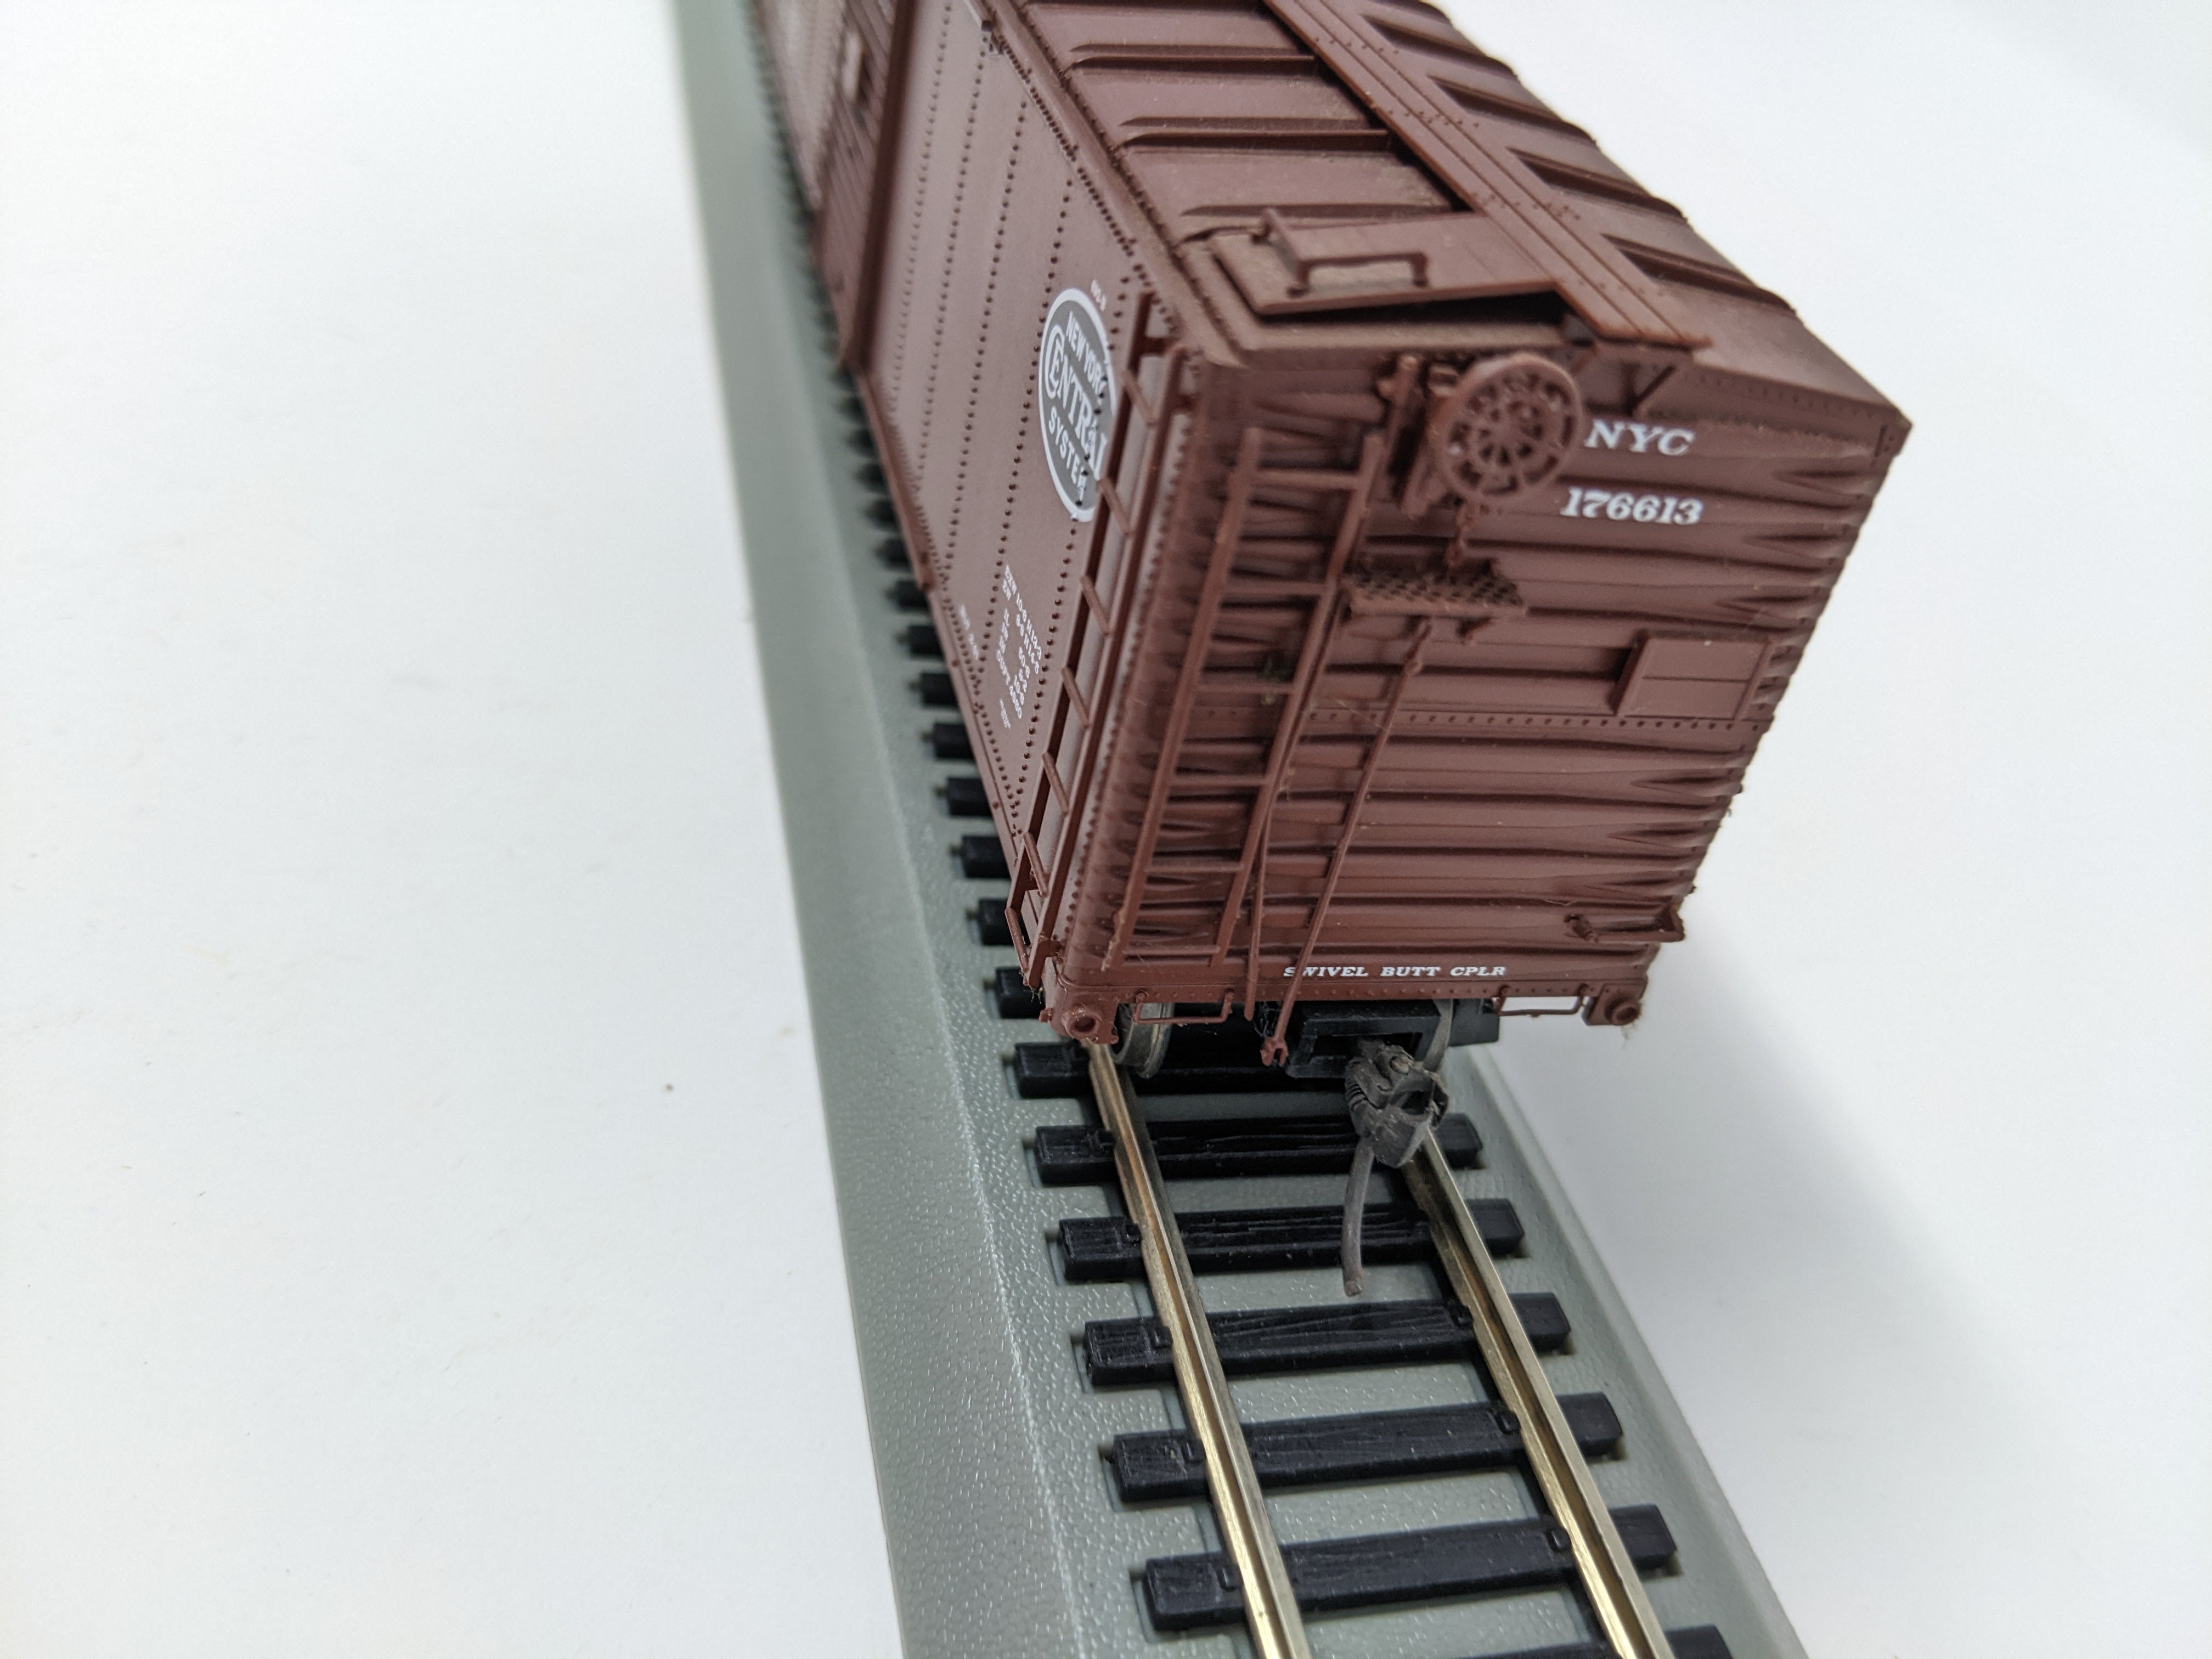 USED HO Scale, 50' Steel Box Car, New York Central NYC #176613, Read Description